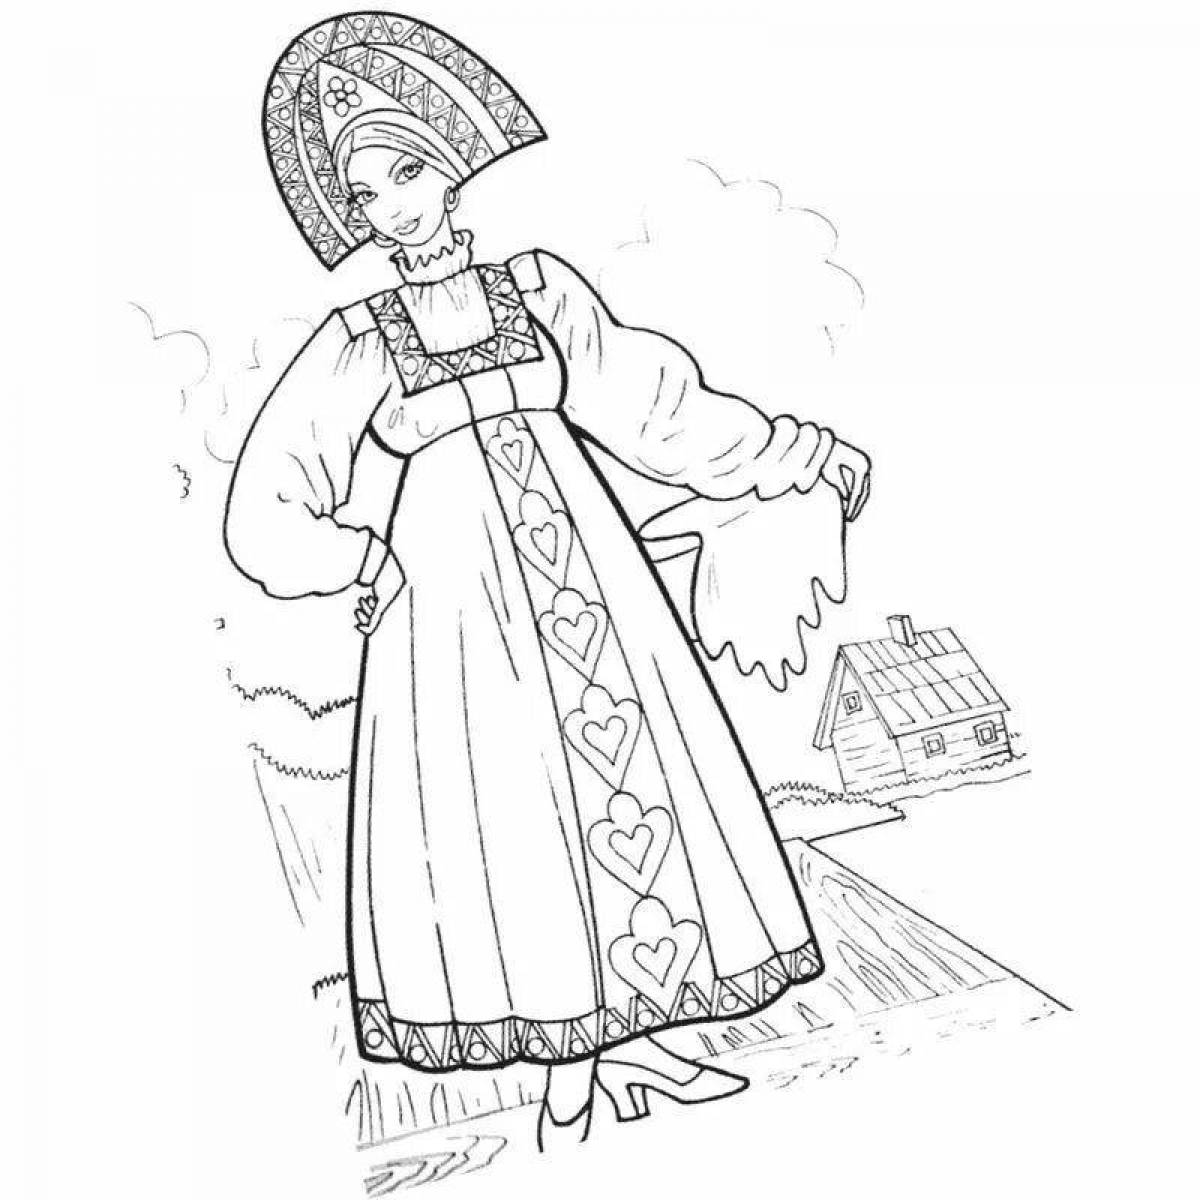 A fascinating coloring of the Russian costume